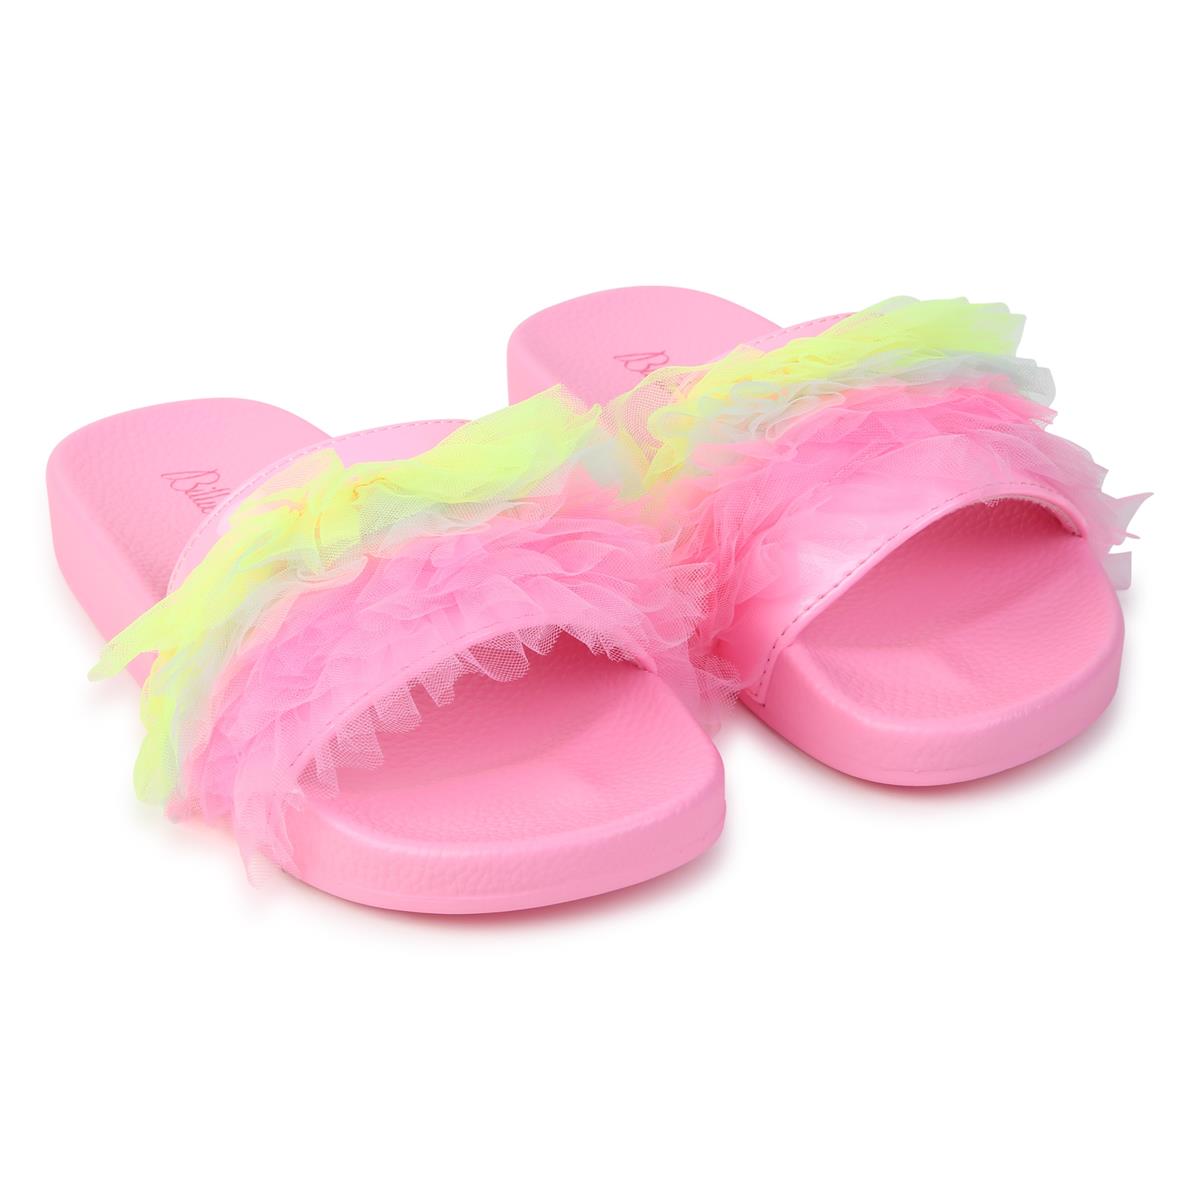 Girls Pink Slippers